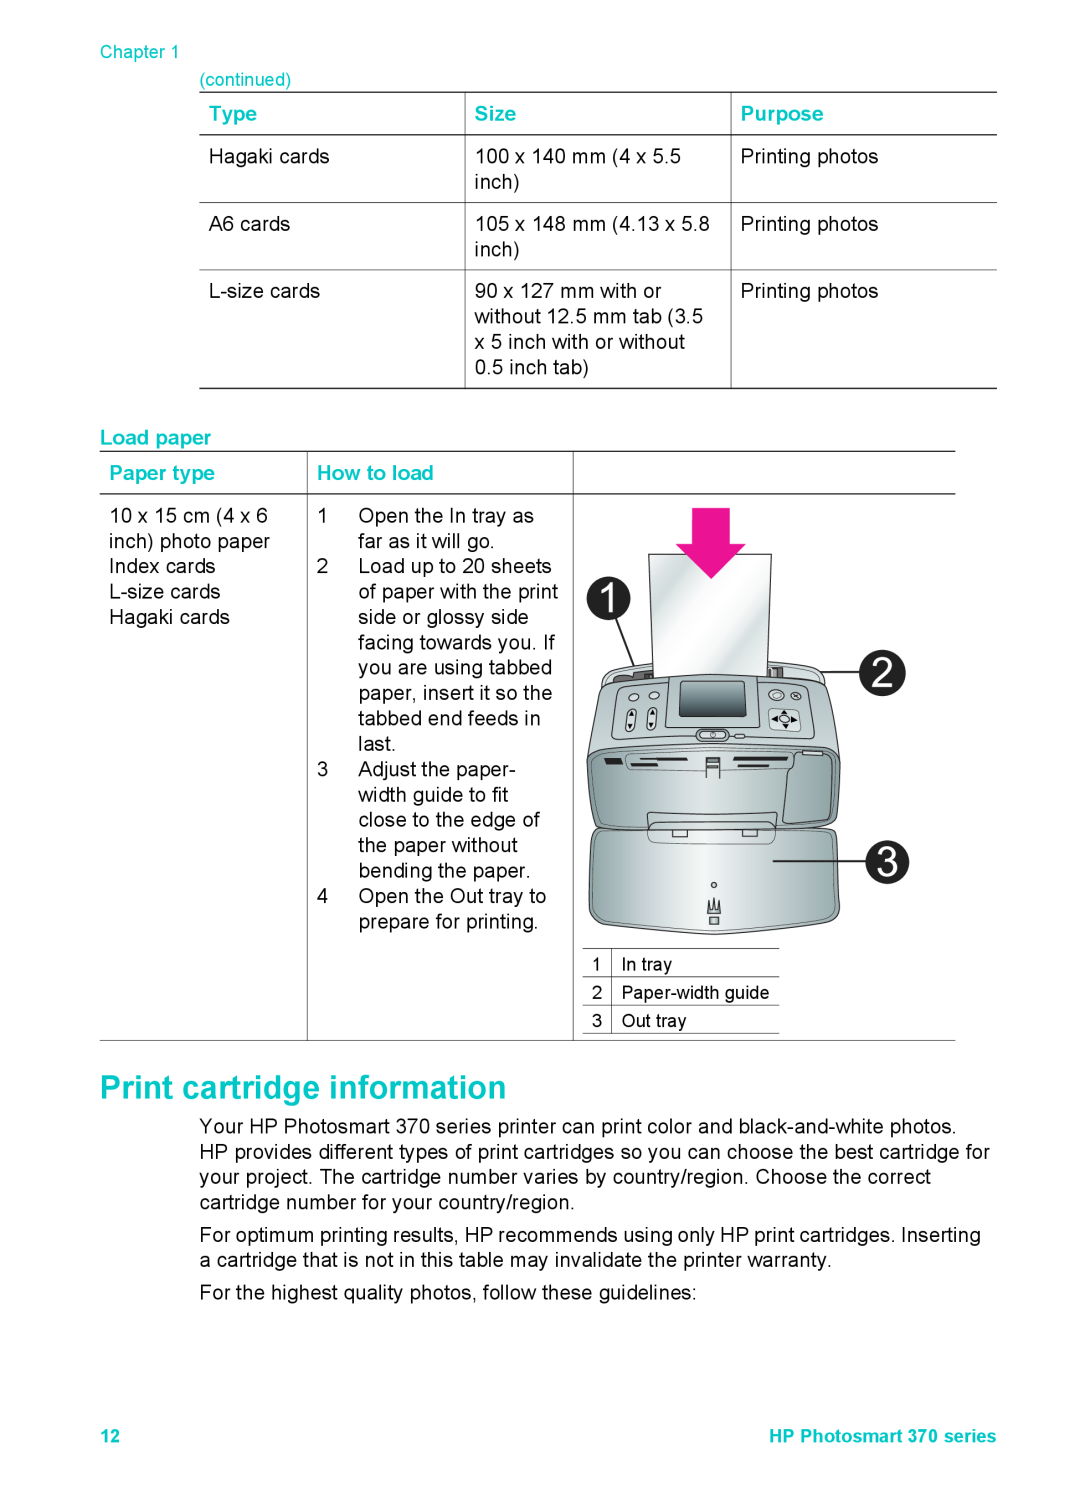 Olympus 370 series manual Print cartridge information, Load paper Paper type, How to load, Type, Size, Purpose 